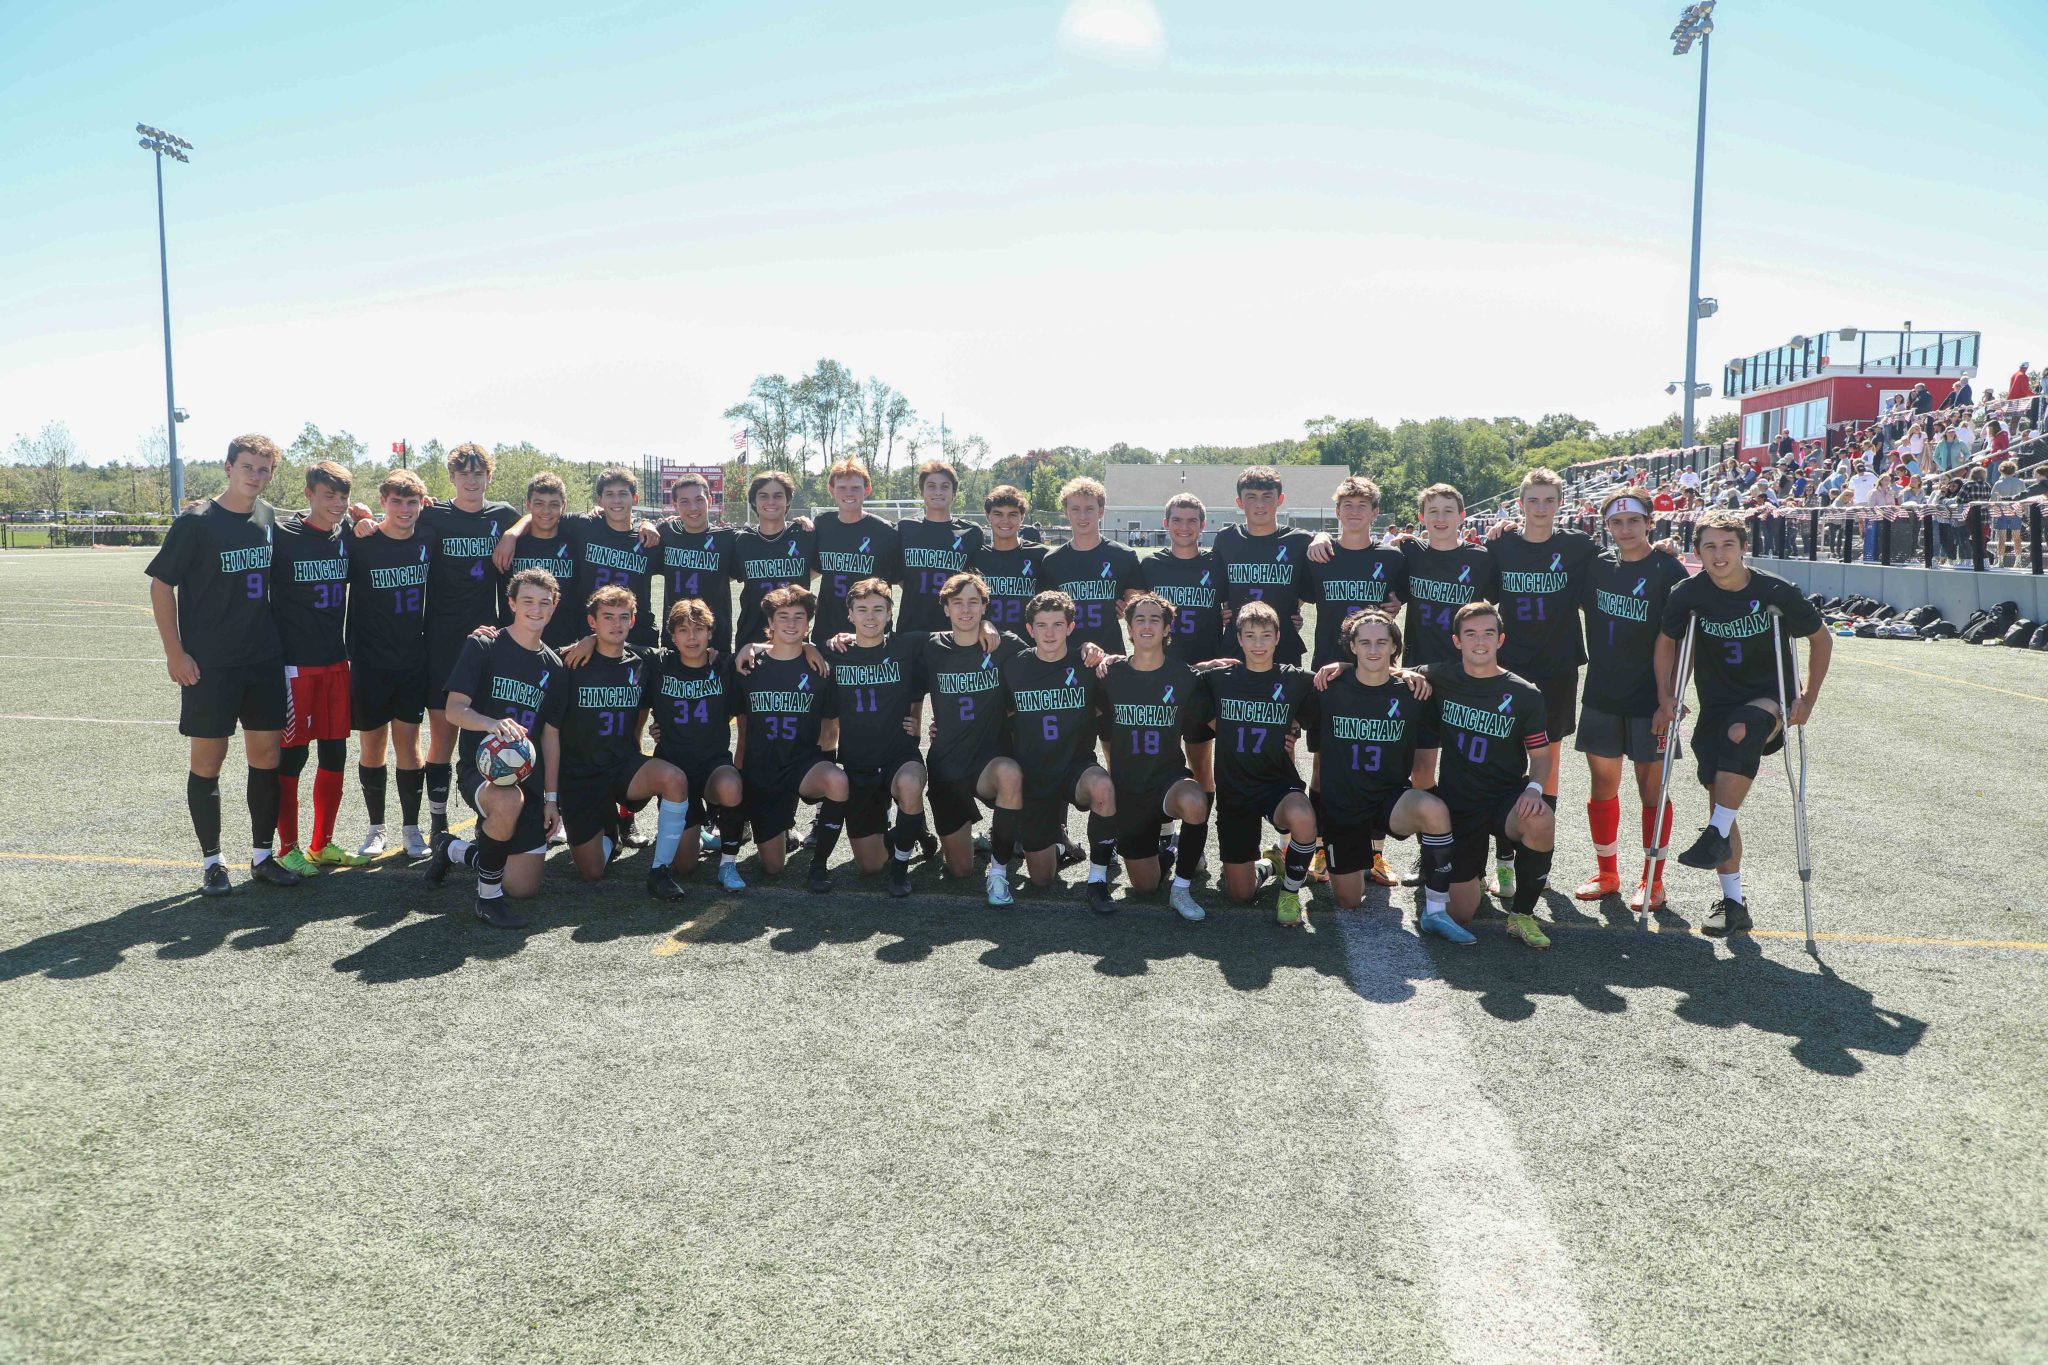 The boys soccer team wore custom black jerseys to bring awareness to Suicide Prevention.  